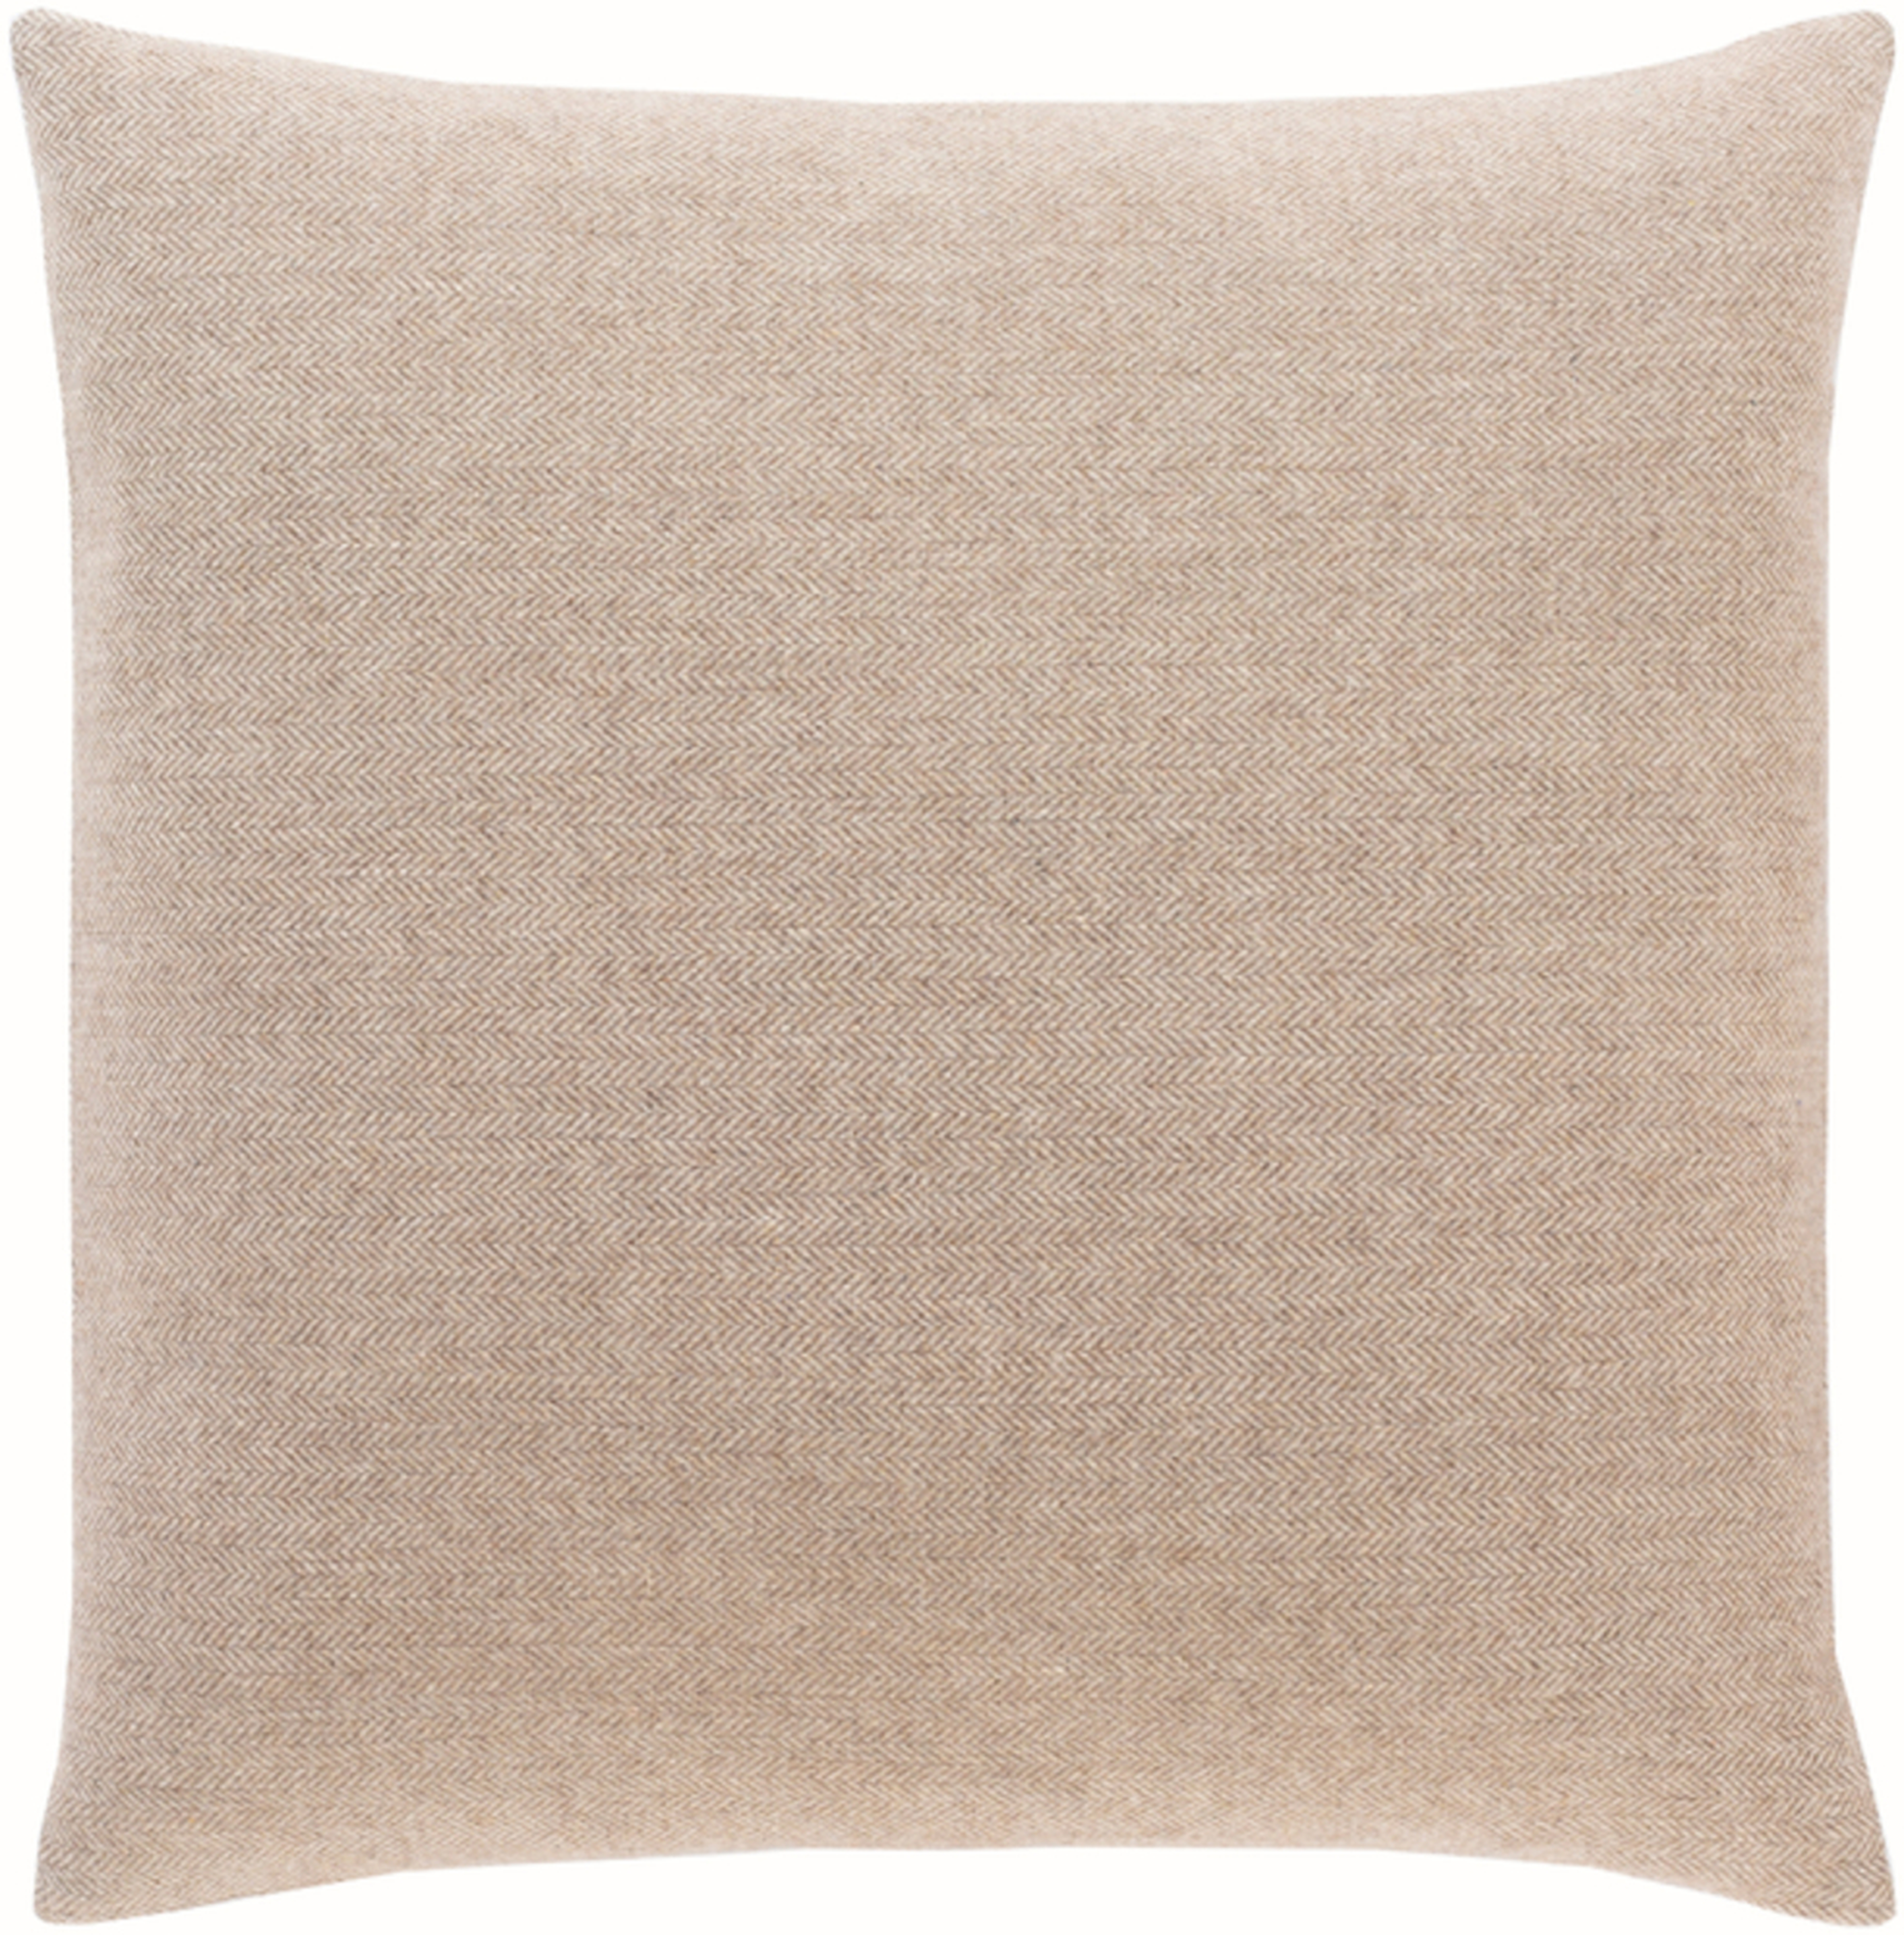 Wells Pillow, 18" x 18", Taupe - Cove Goods